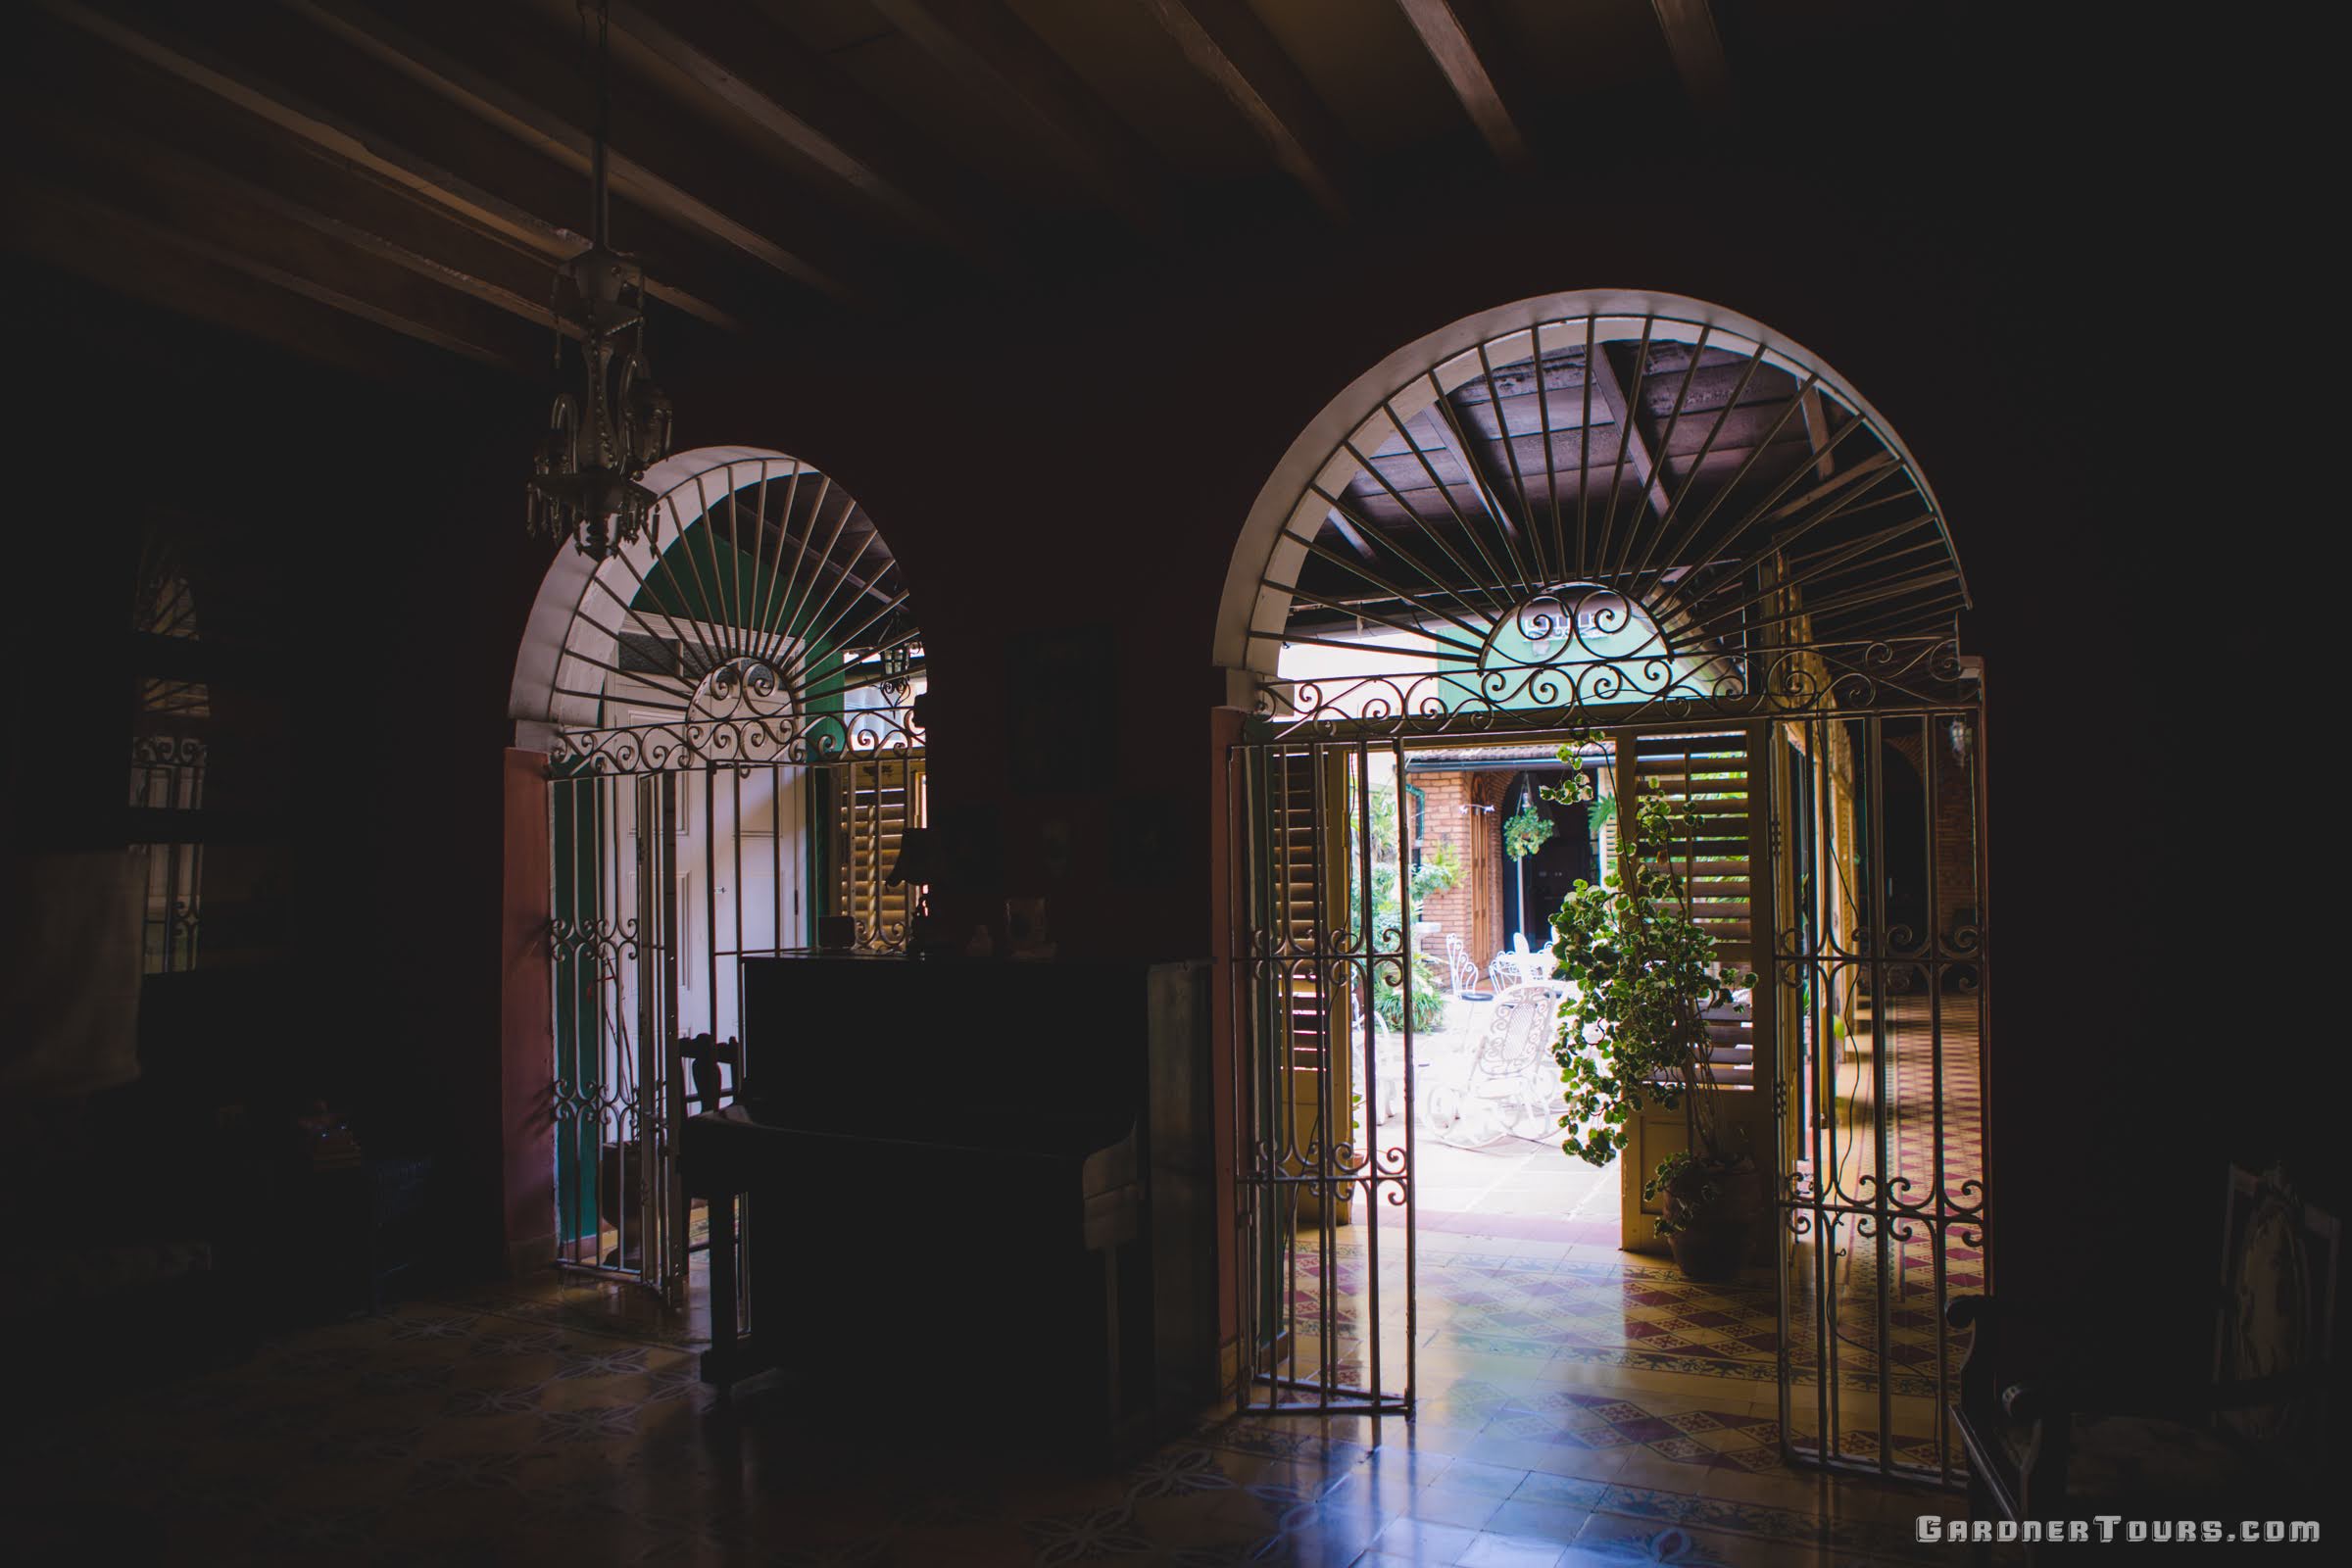 Classic BnB Accommodations with Ornate Iron Works at a Casa Particular BnB in Trinidad, Cuba